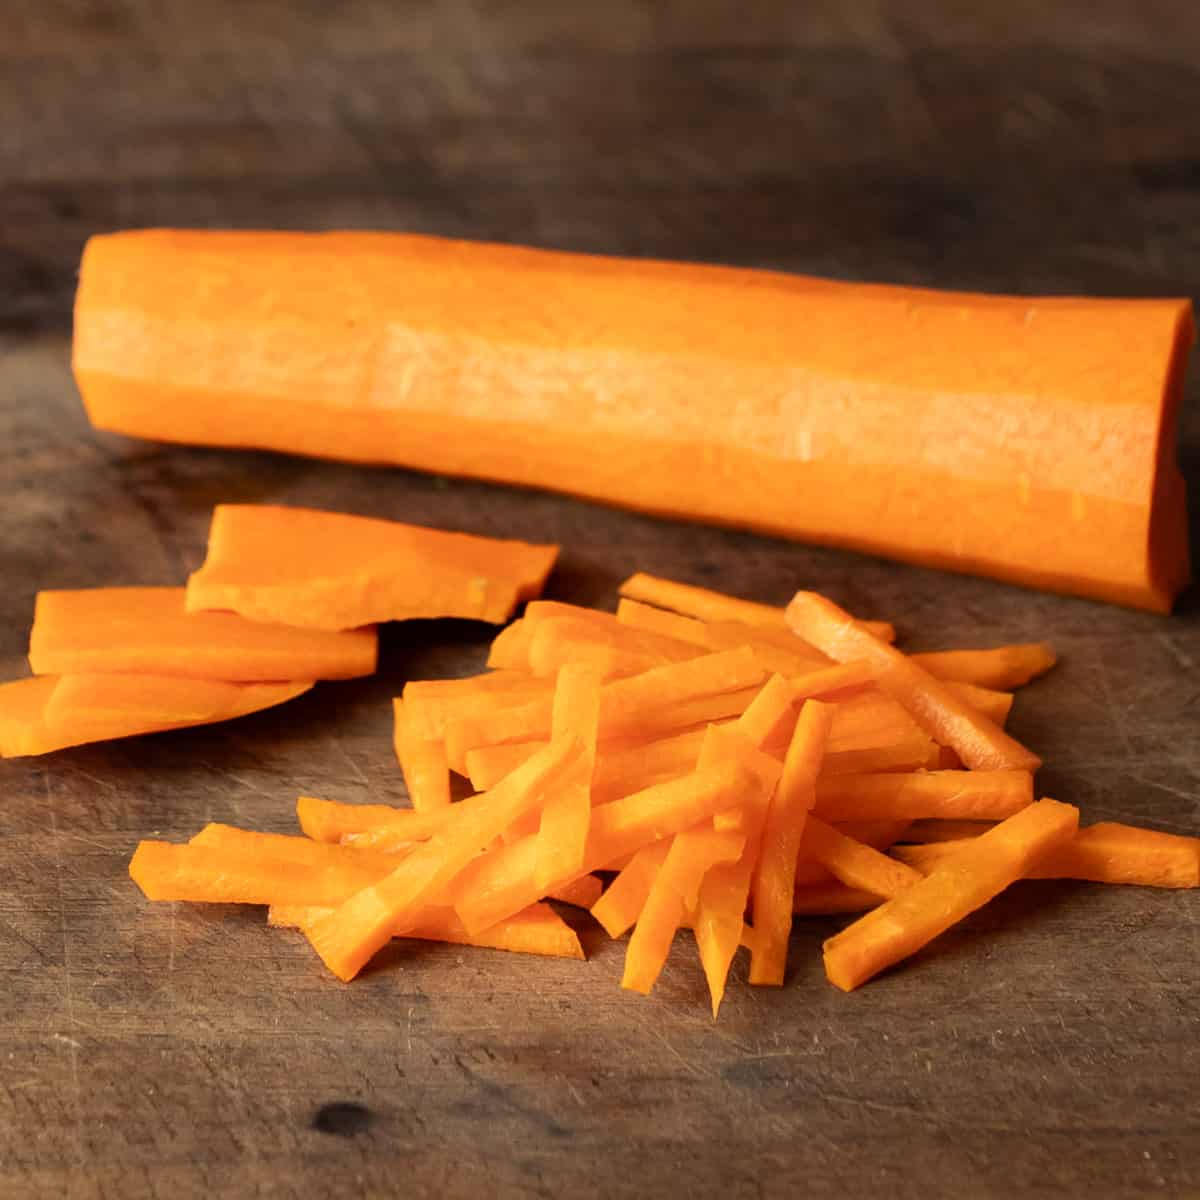 Peeled carrot sliced in a thin julienne sticks.